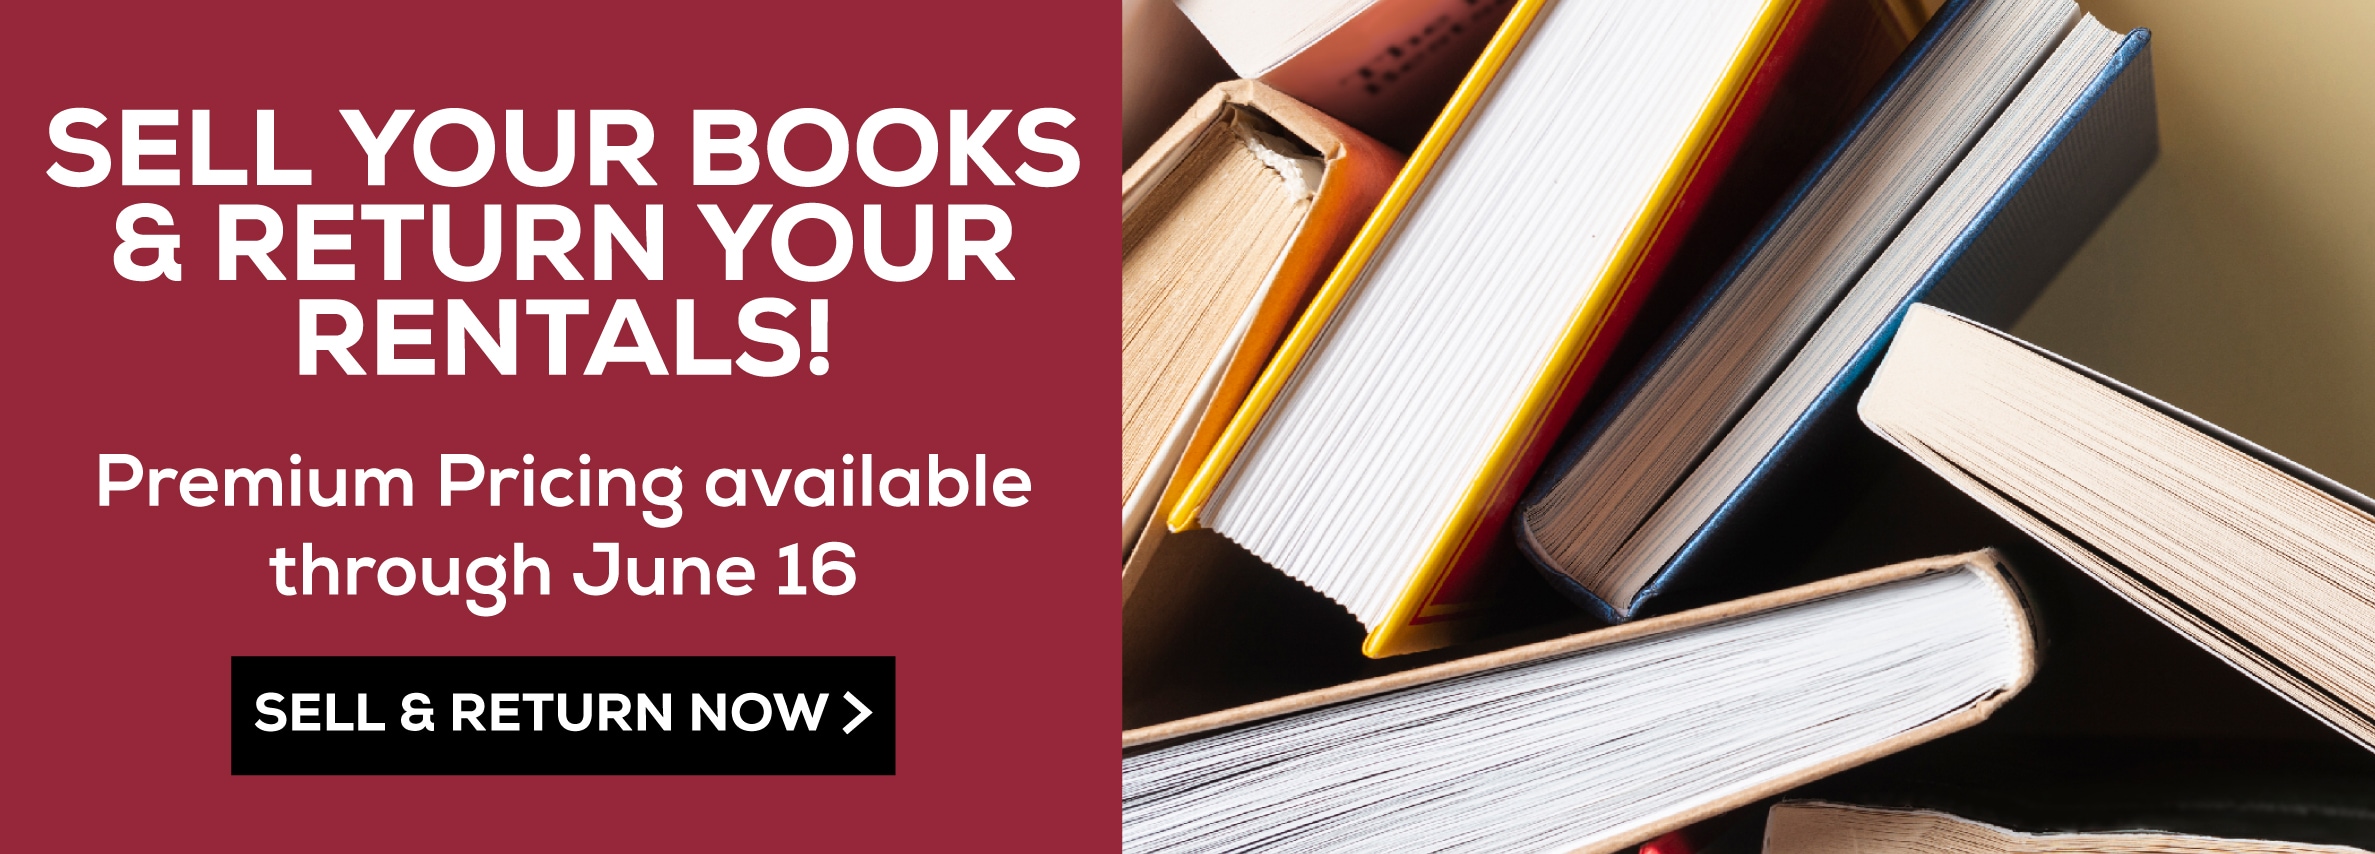 Sell your textbooks! Premium pricing available through June 16. Sell now>